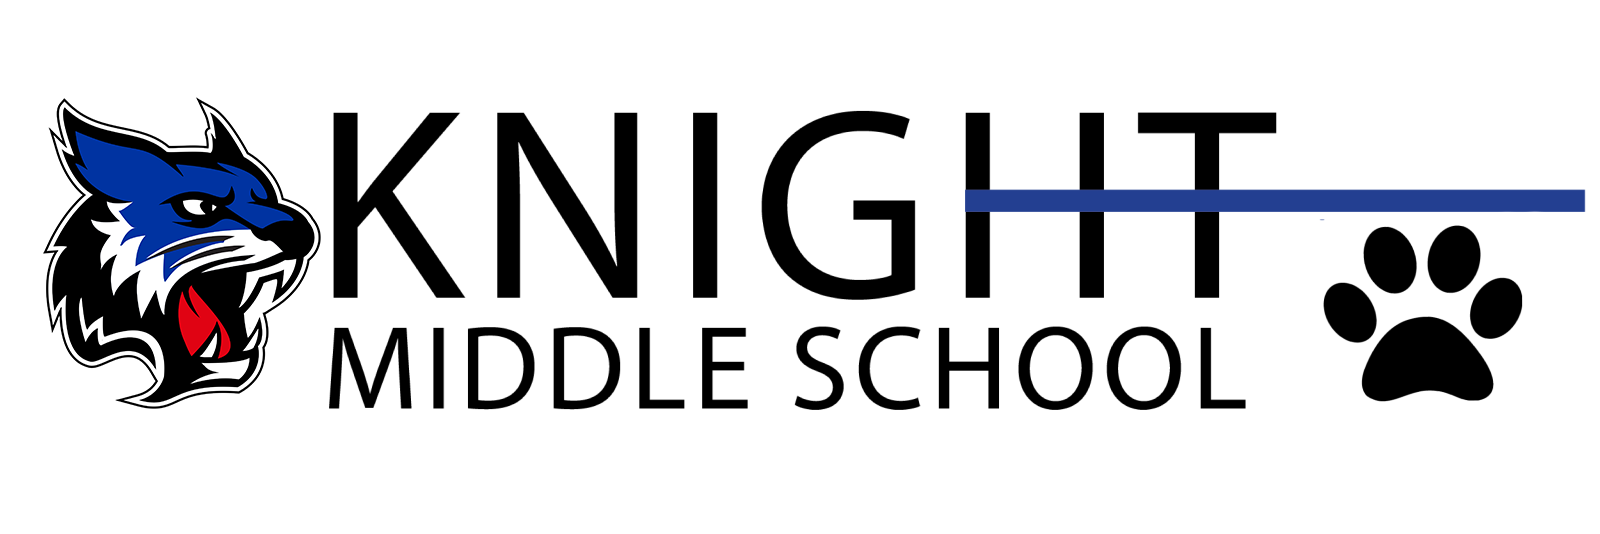 a logo for knight middle school with a wolf and paw print .